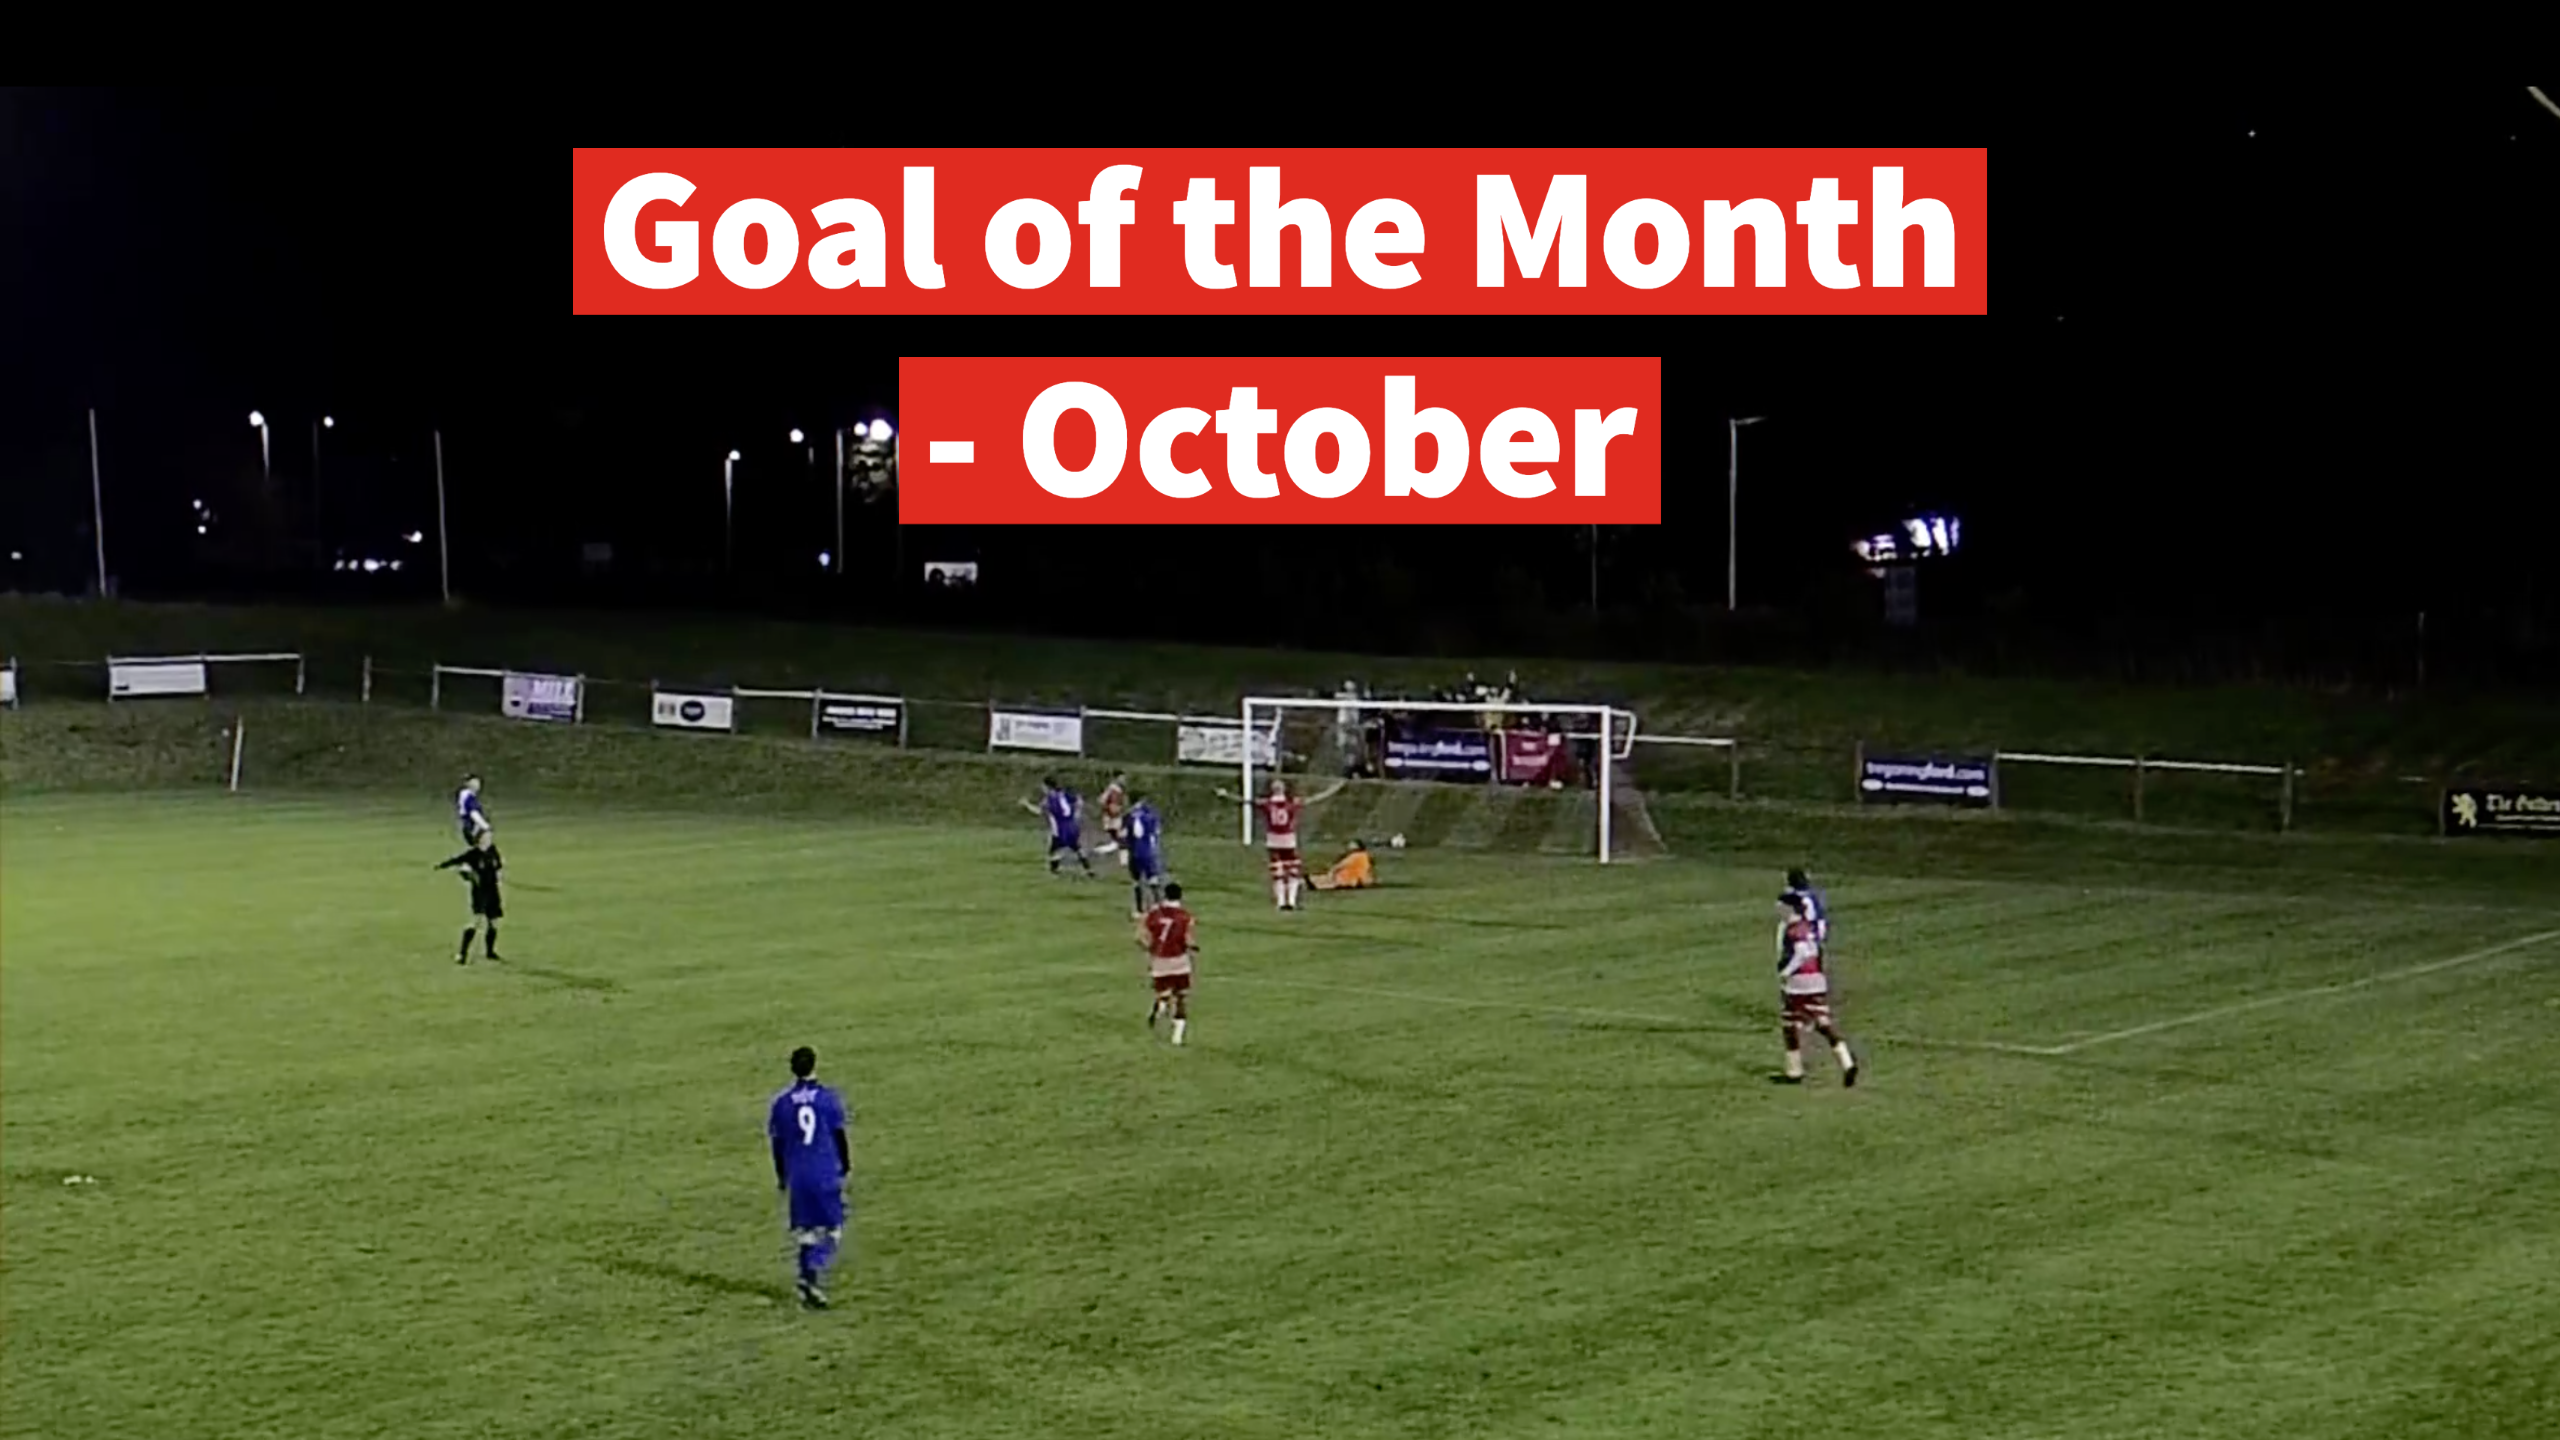 Goal of the Month - October